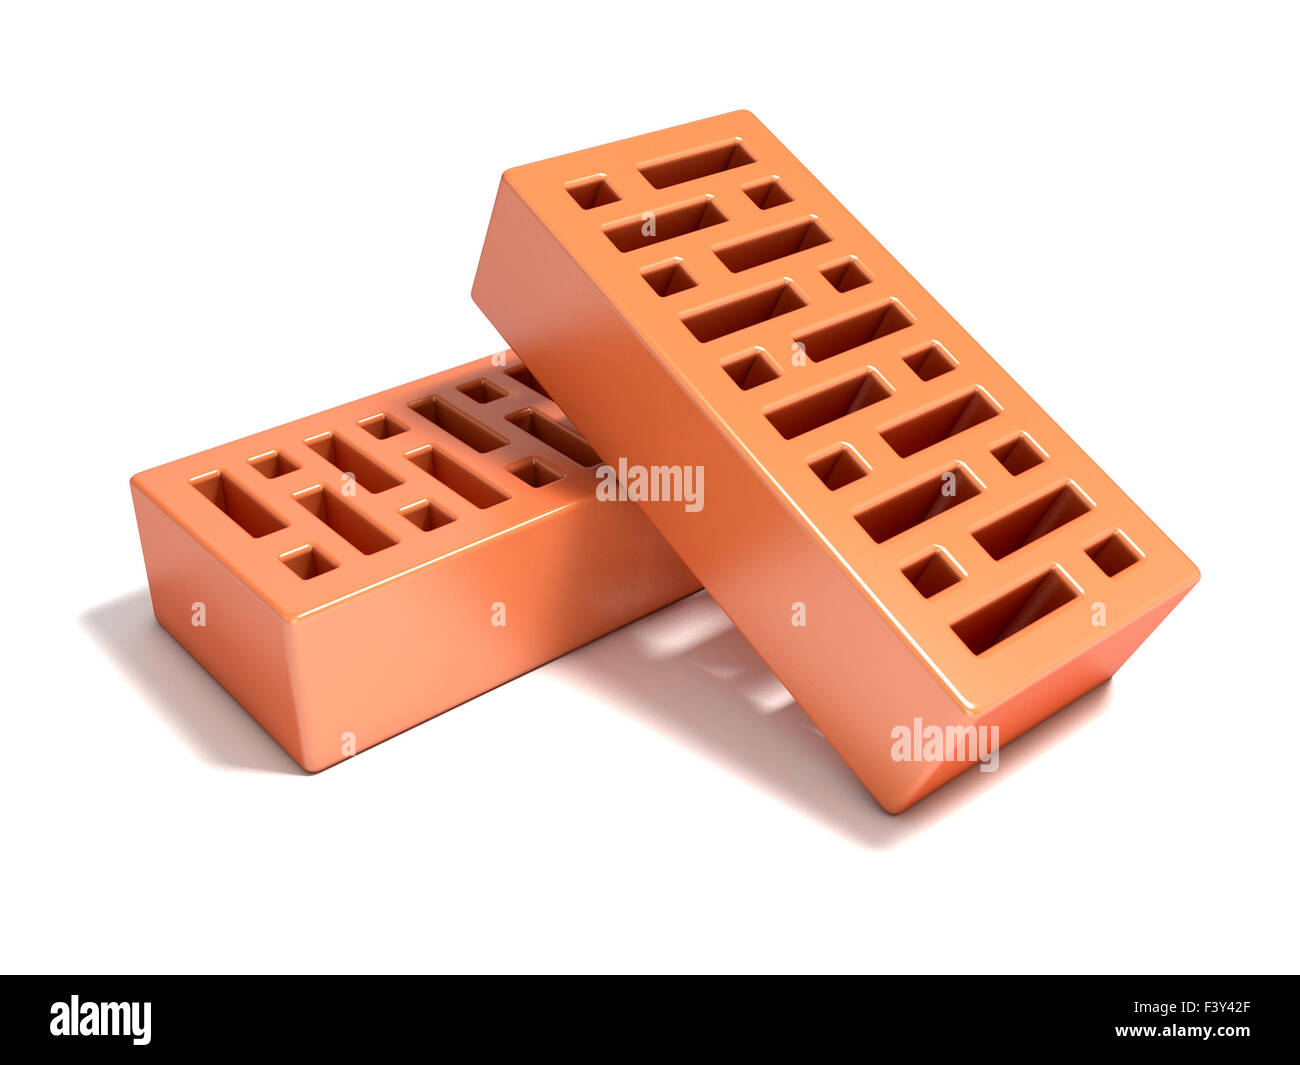 Two red bricks with rectangular holes. 3D render illustration isolated on a white background. Stock Photo